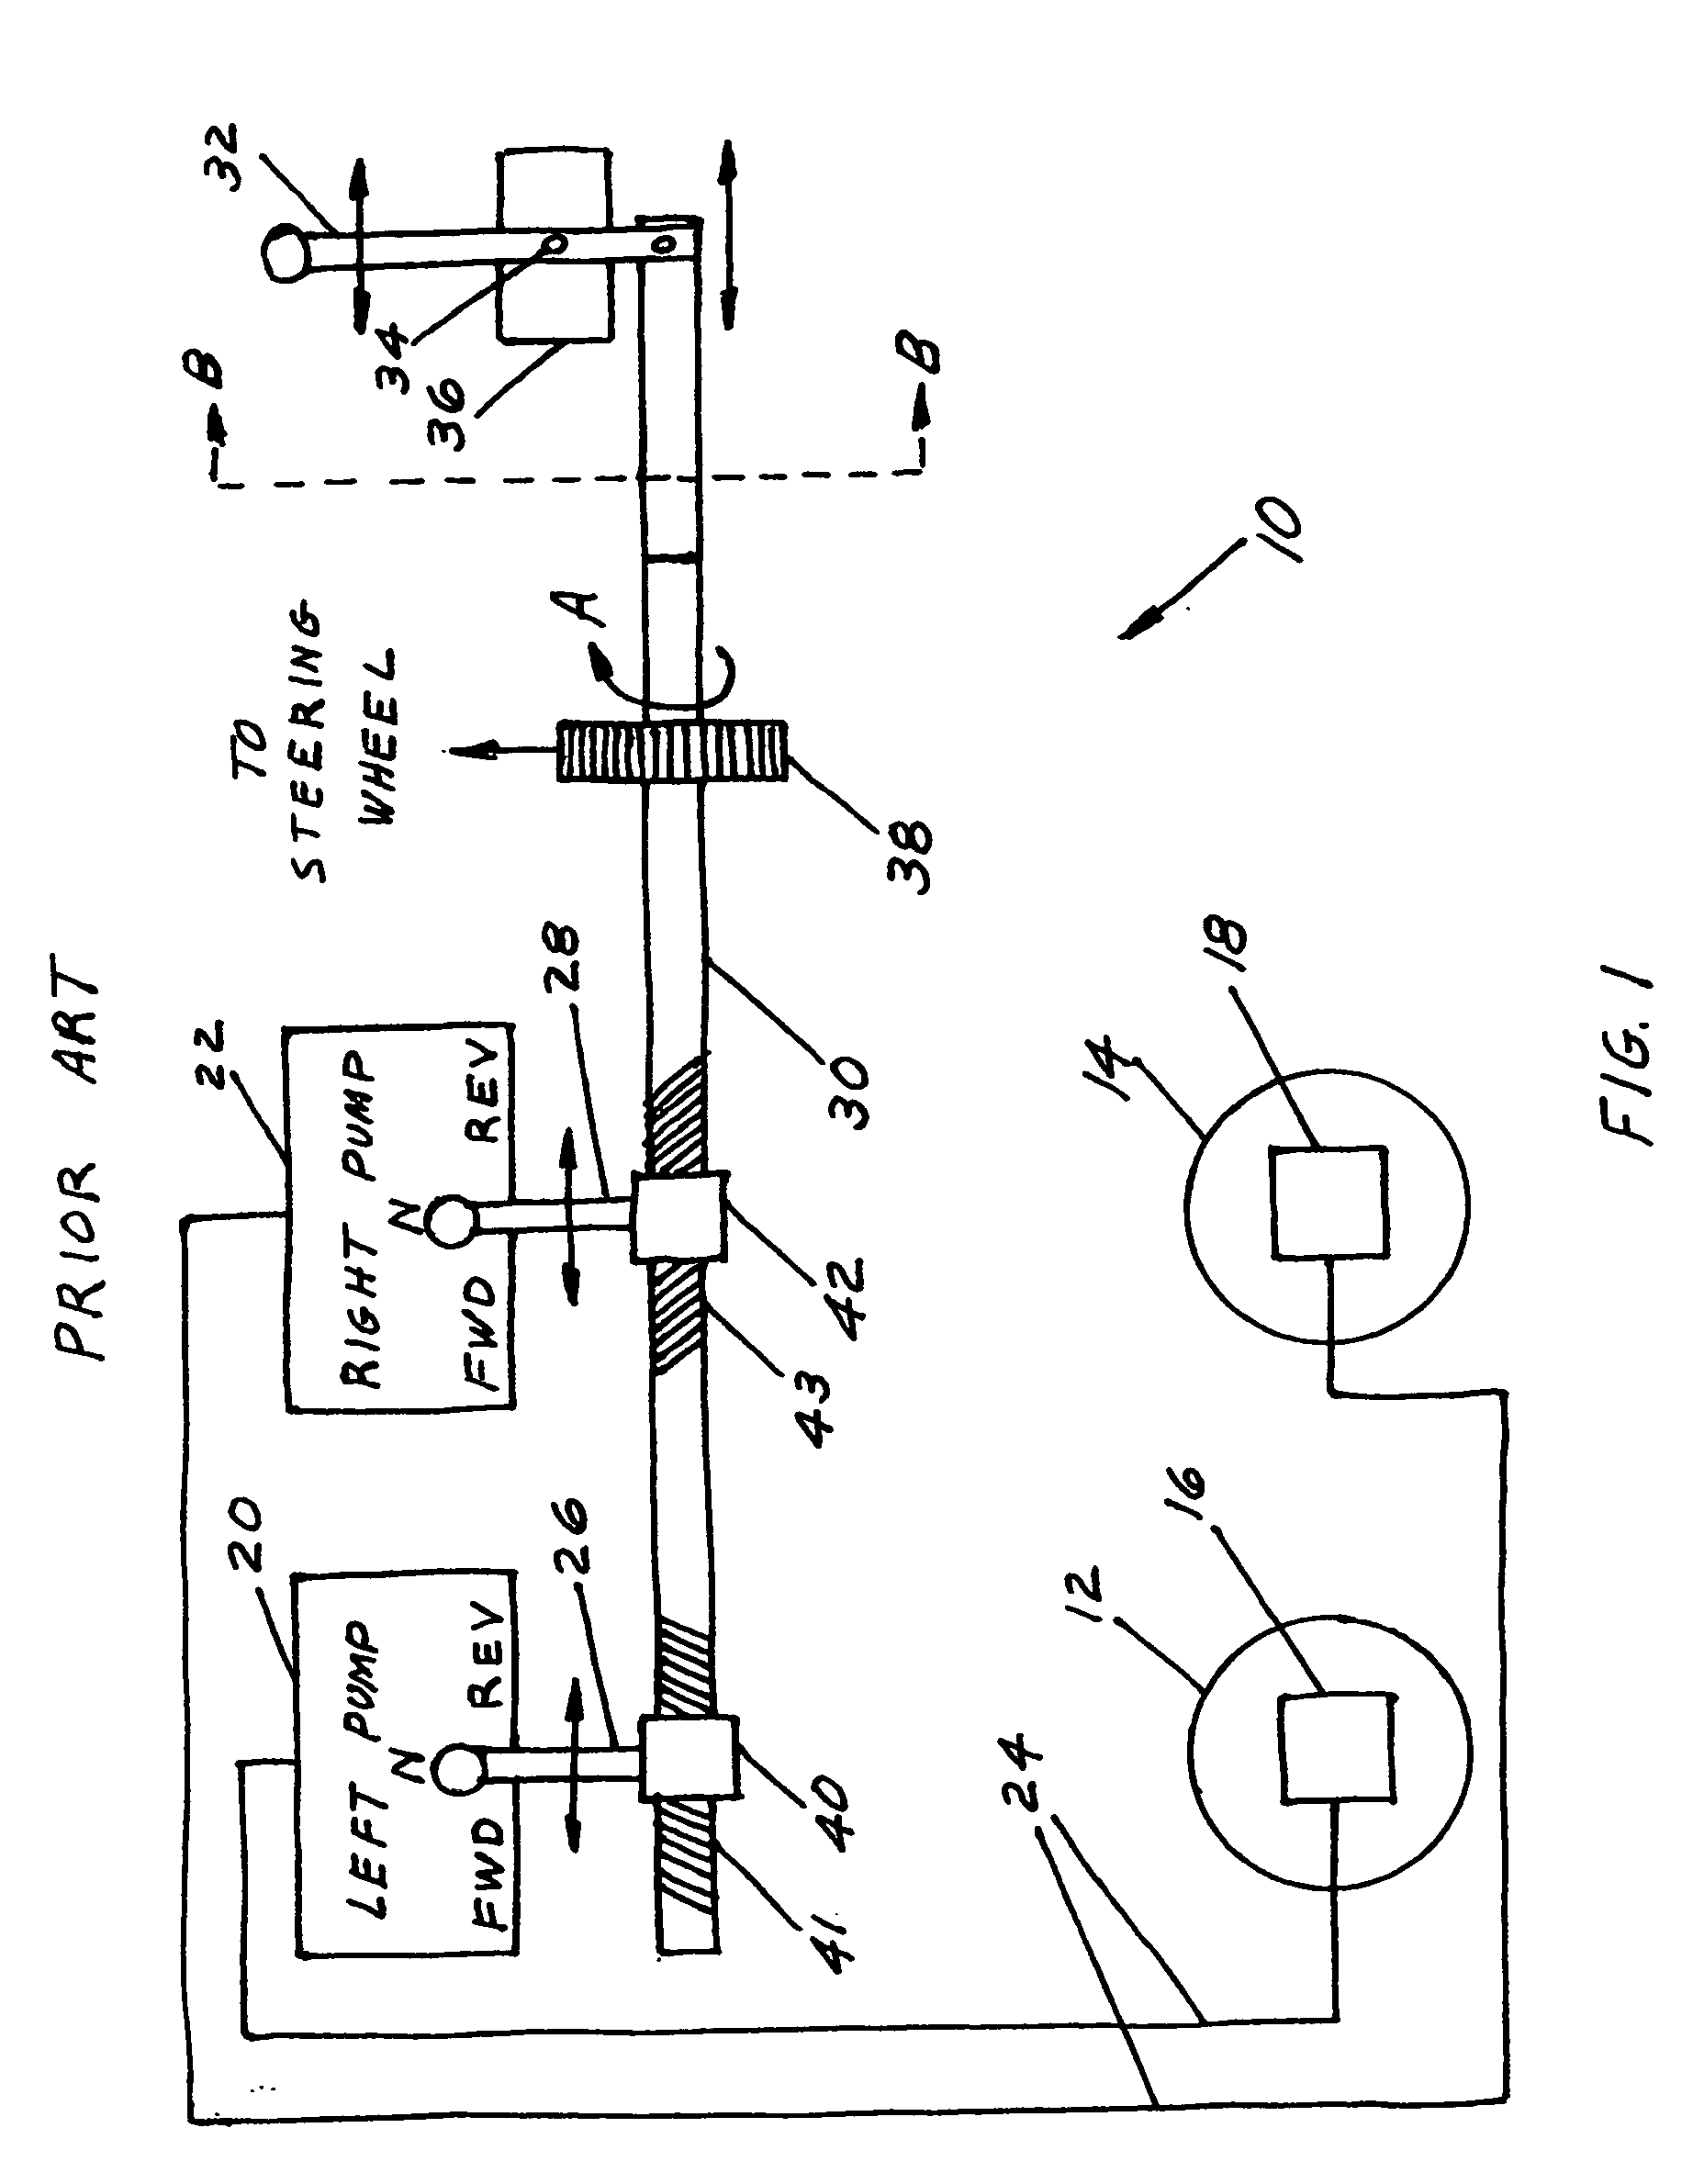 Electronic speed control system for farm machines